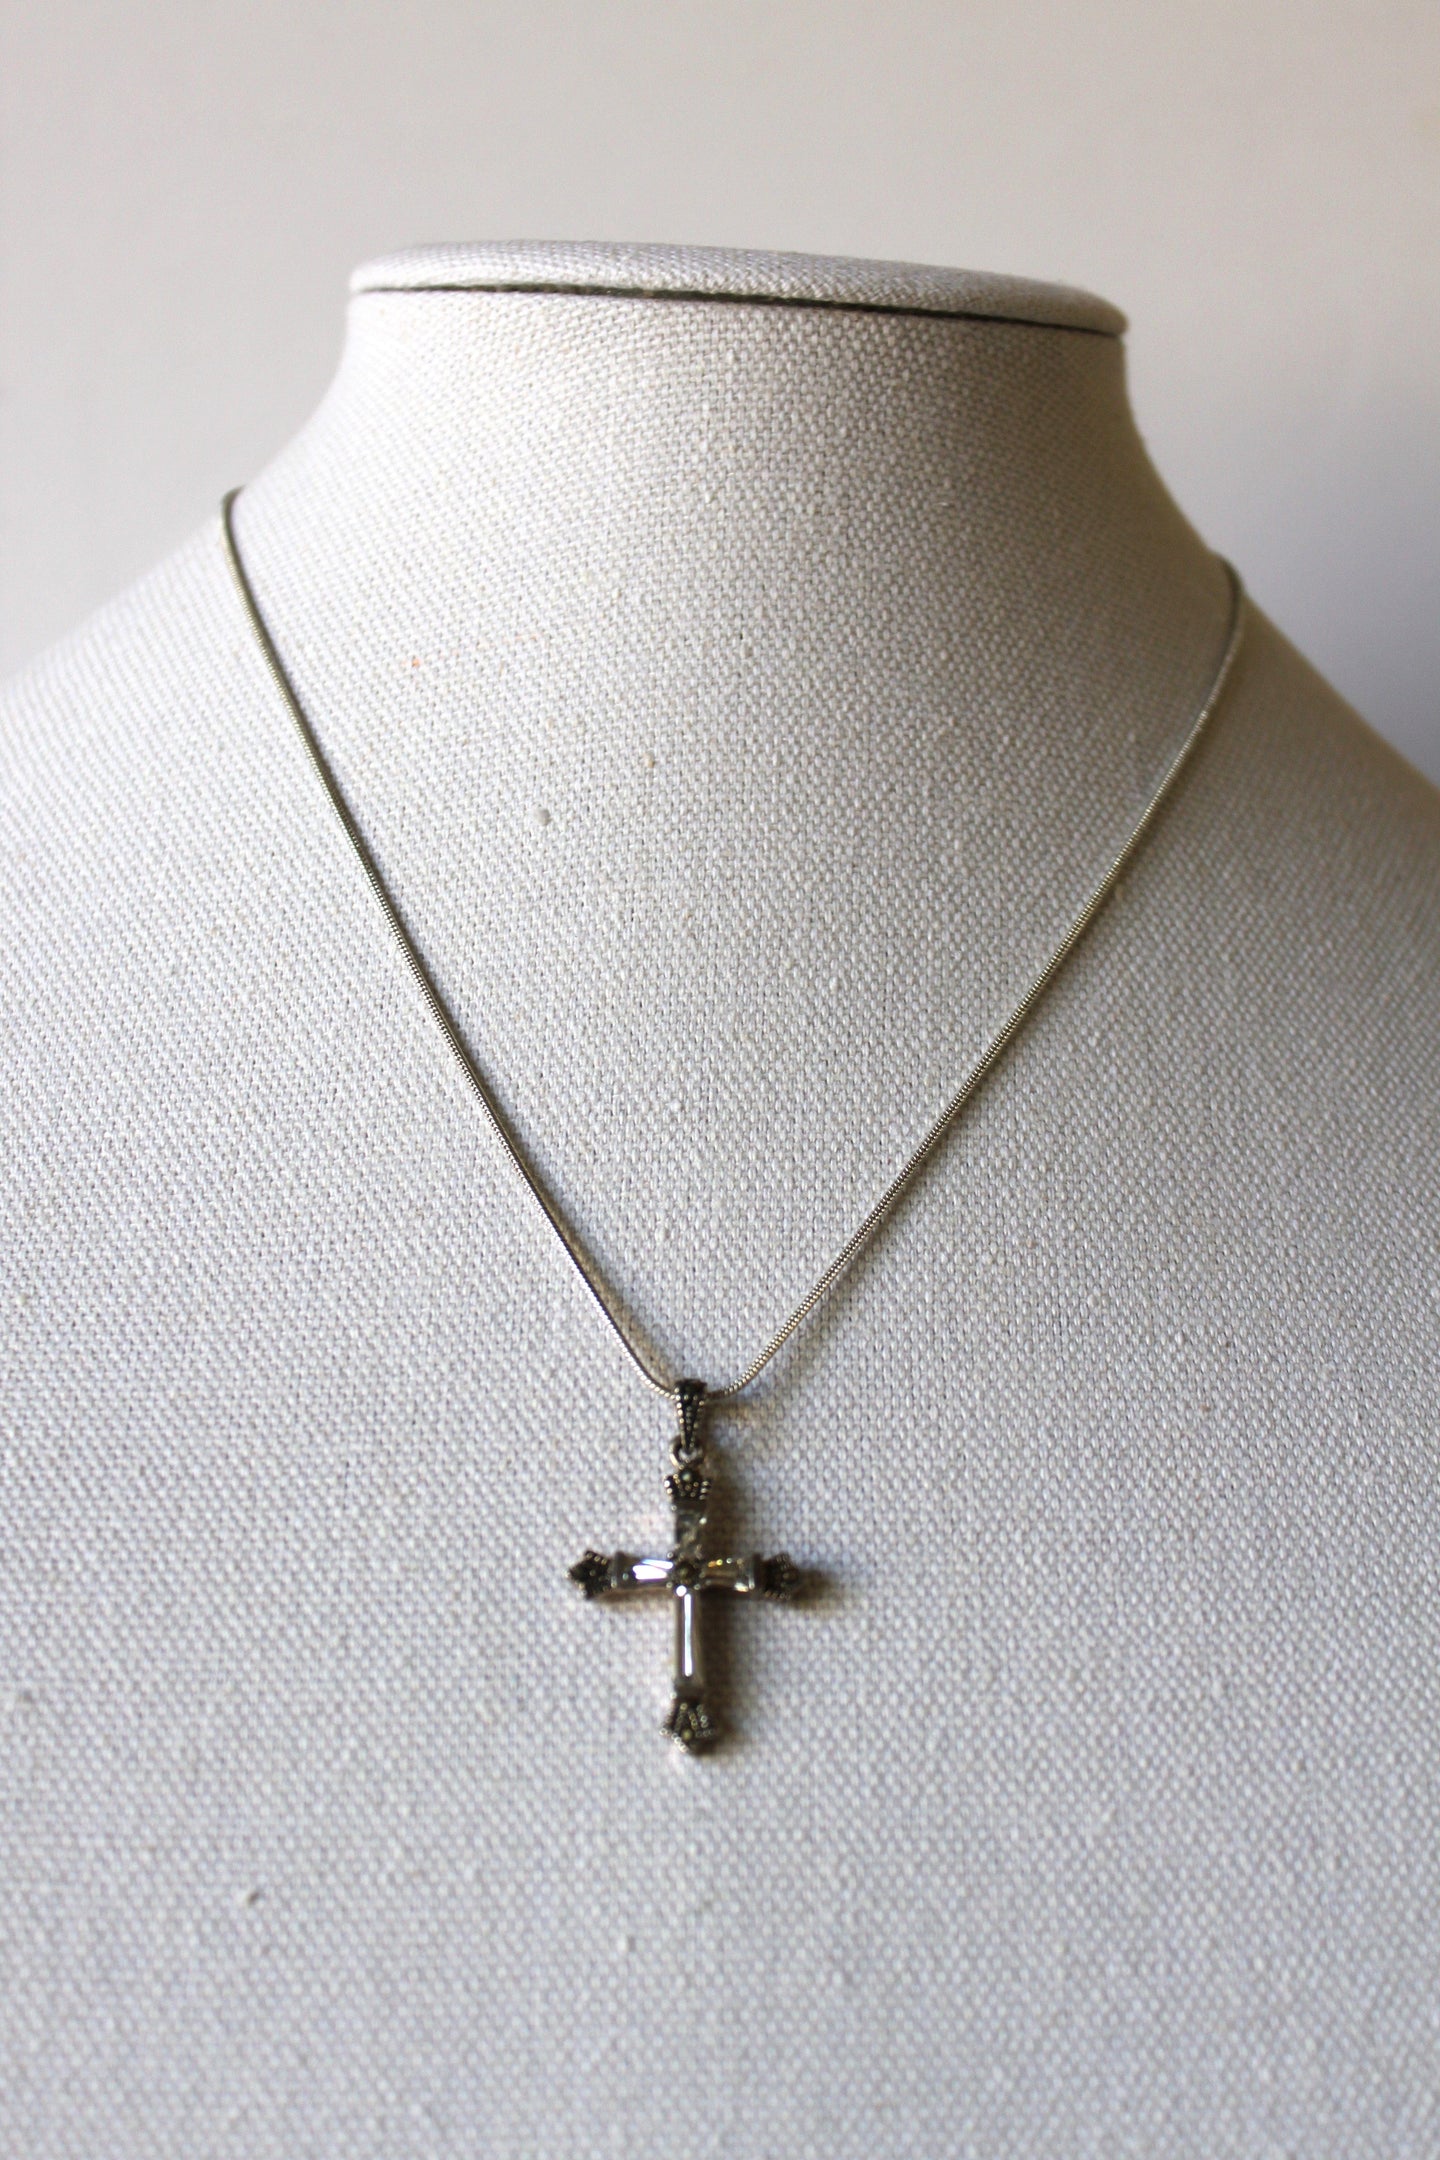 Necklace - Sterling silver chain 925 with beautiful cross pendant- 18